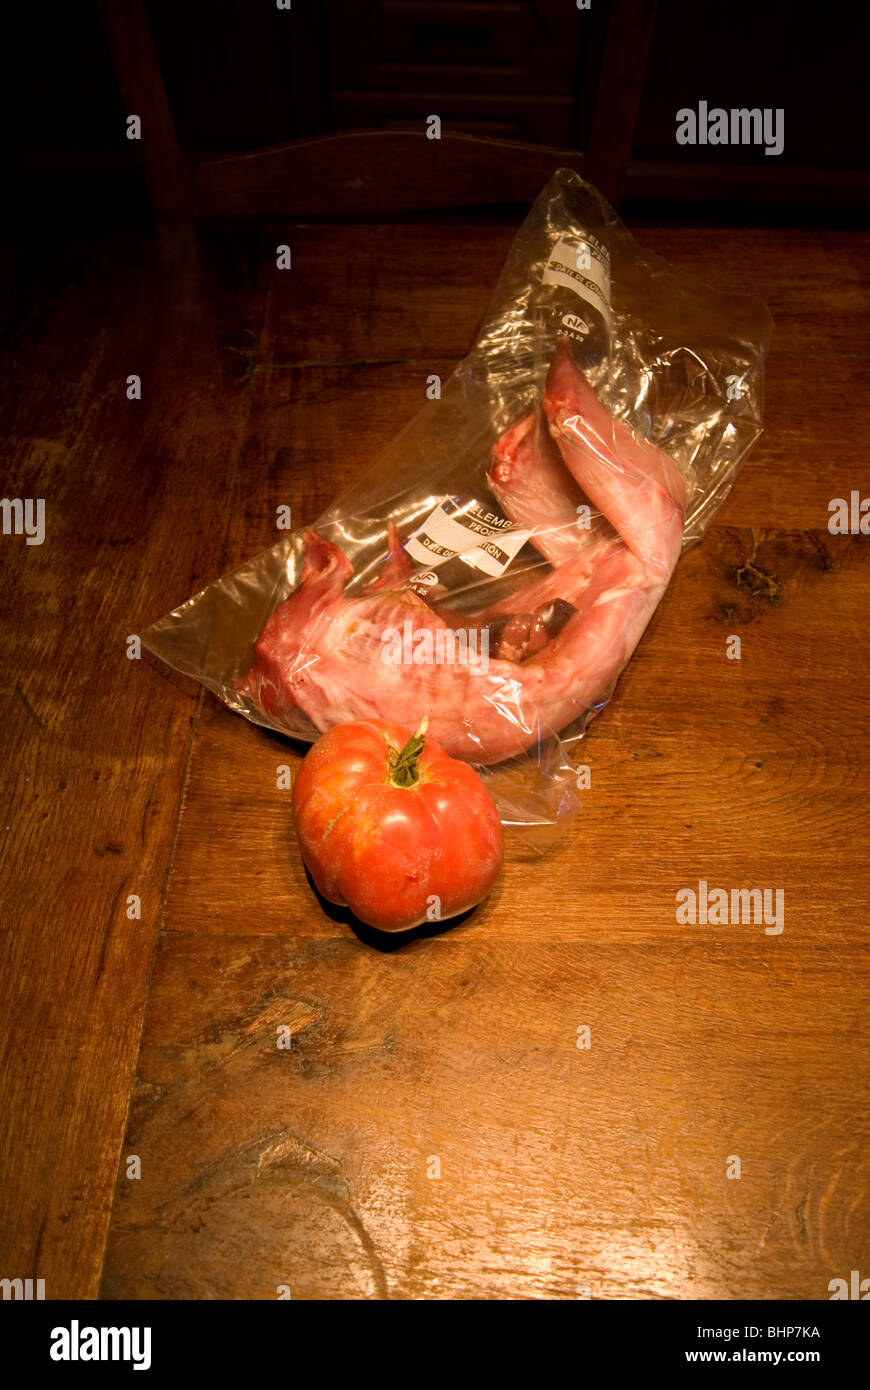 a slighty macabre still life of a large steak tomato and a skinned rabbit in a bag on a wooden kitchen table Stock Photo